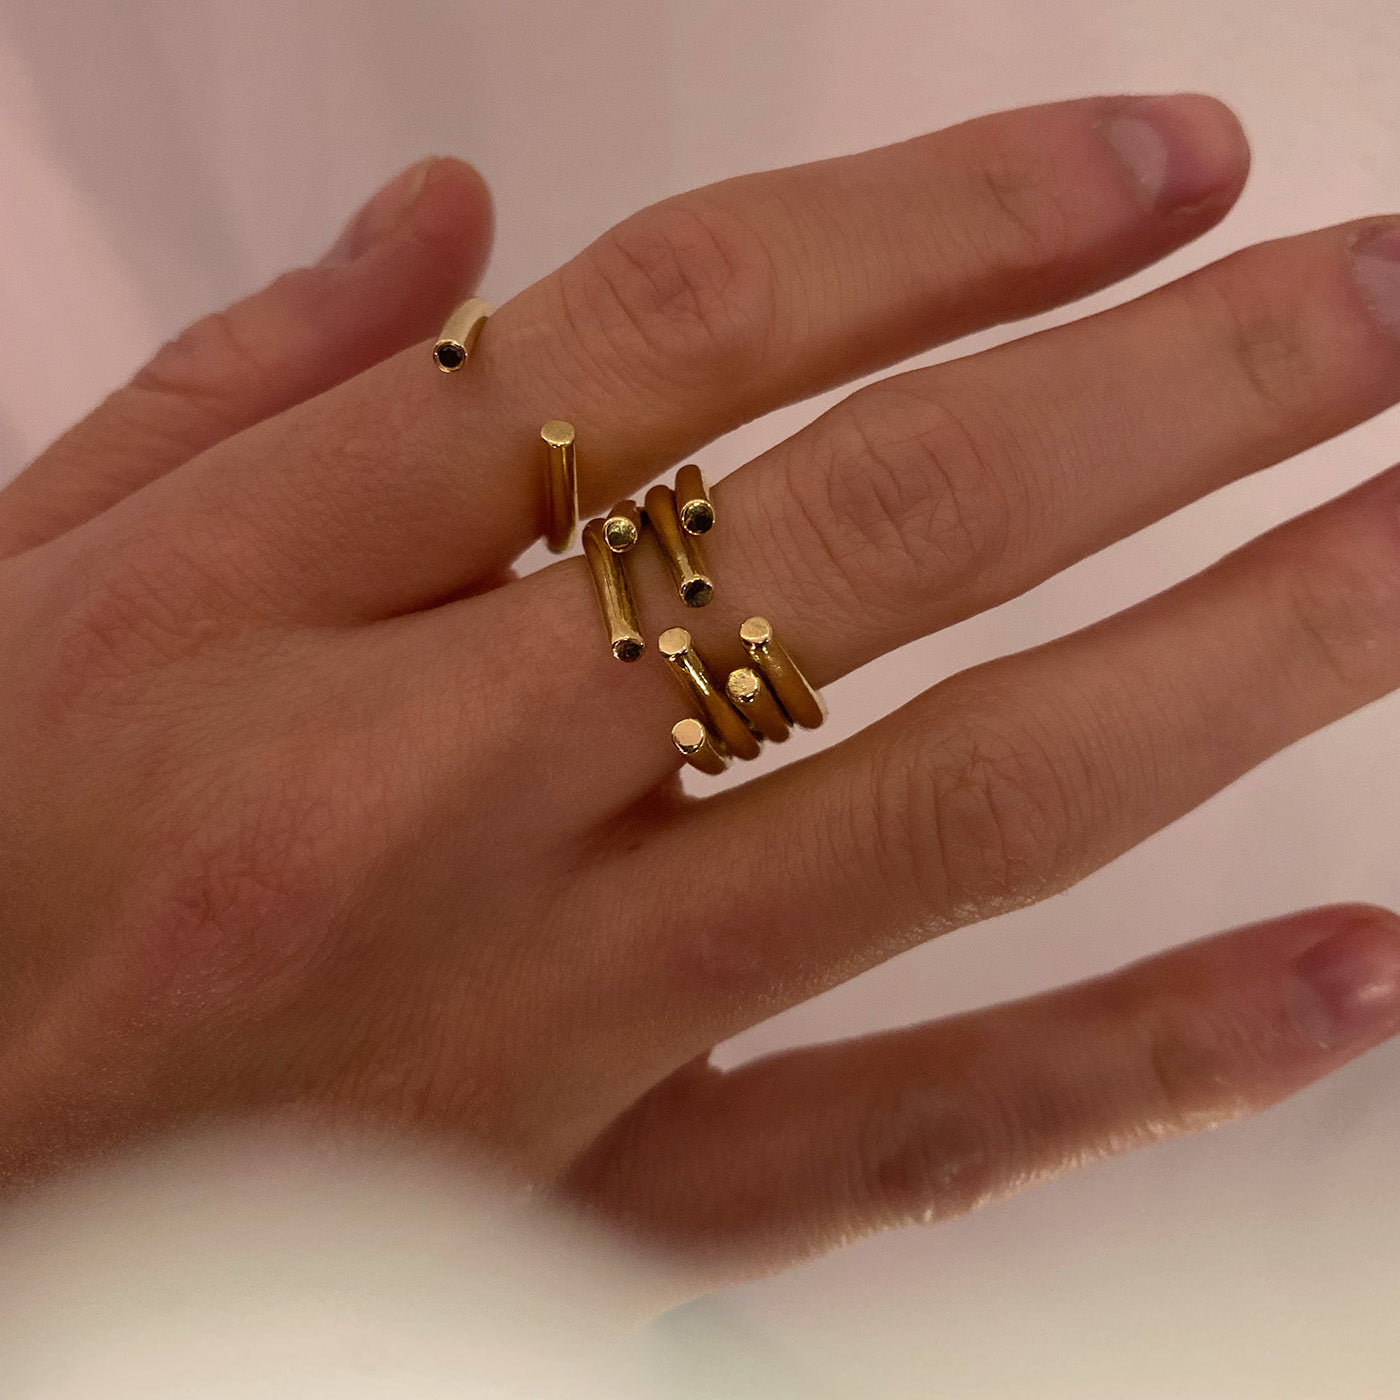 ring chaotic gold 4 curves 14ct or 18ct solid gold product view innan jewellery independent atelier berlin